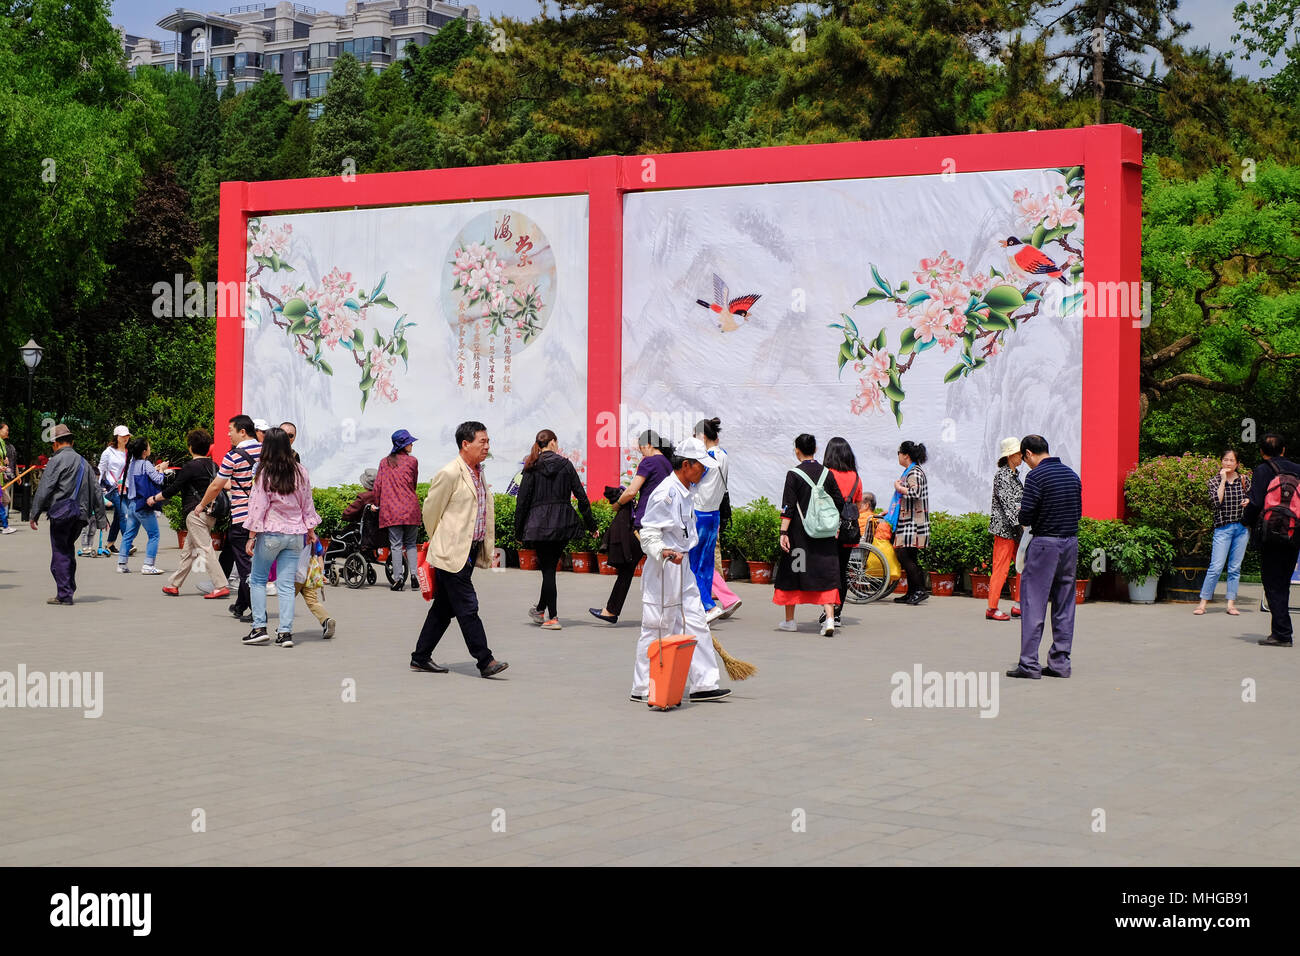 BEIJING, CHINA - APRIL 30, 2018: People in a park. Taoranting Park is a major city park located in Xicheng District in the southern part of Beijing, C Stock Photo